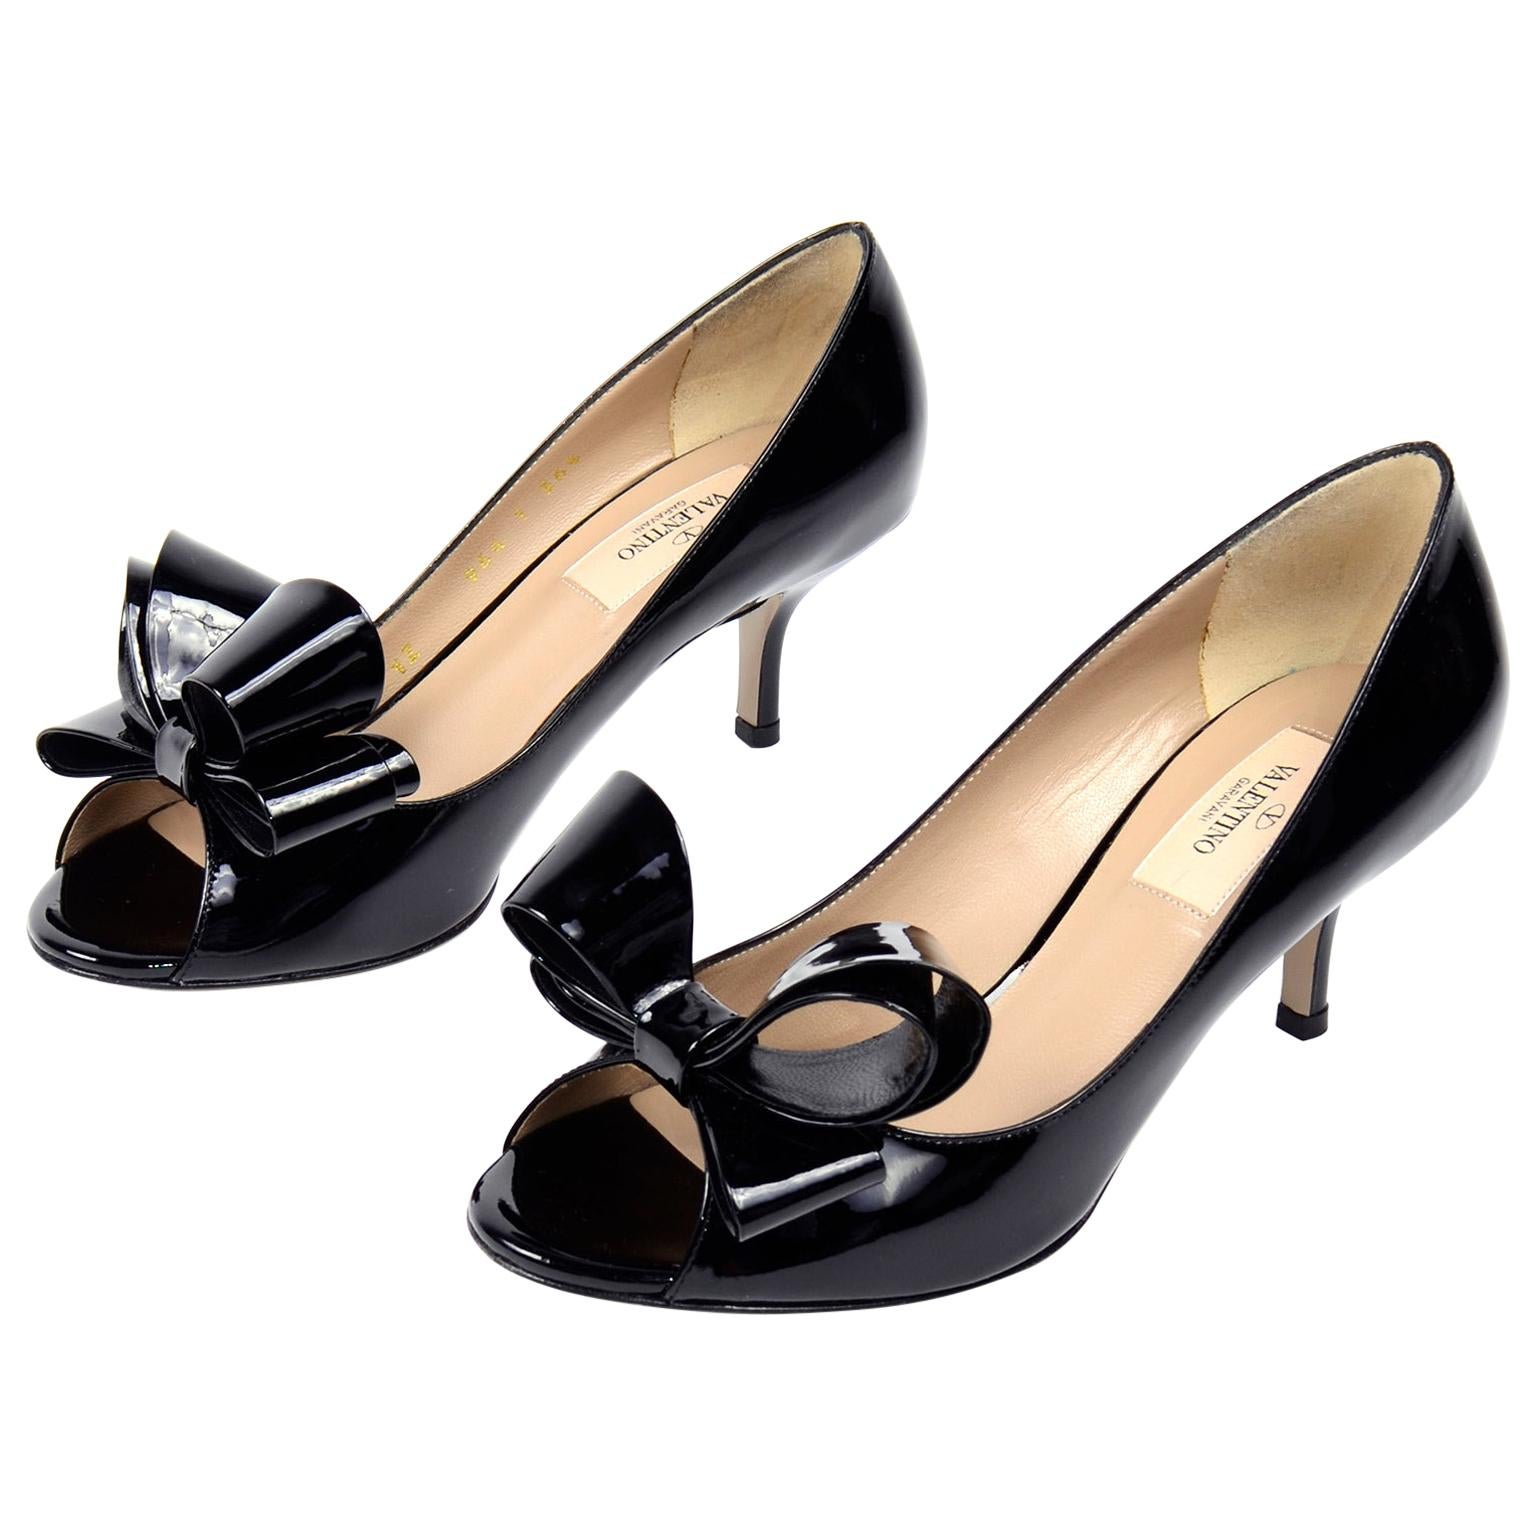 Valentino Black Patent Leather Open Toe Heels With Statement Bows